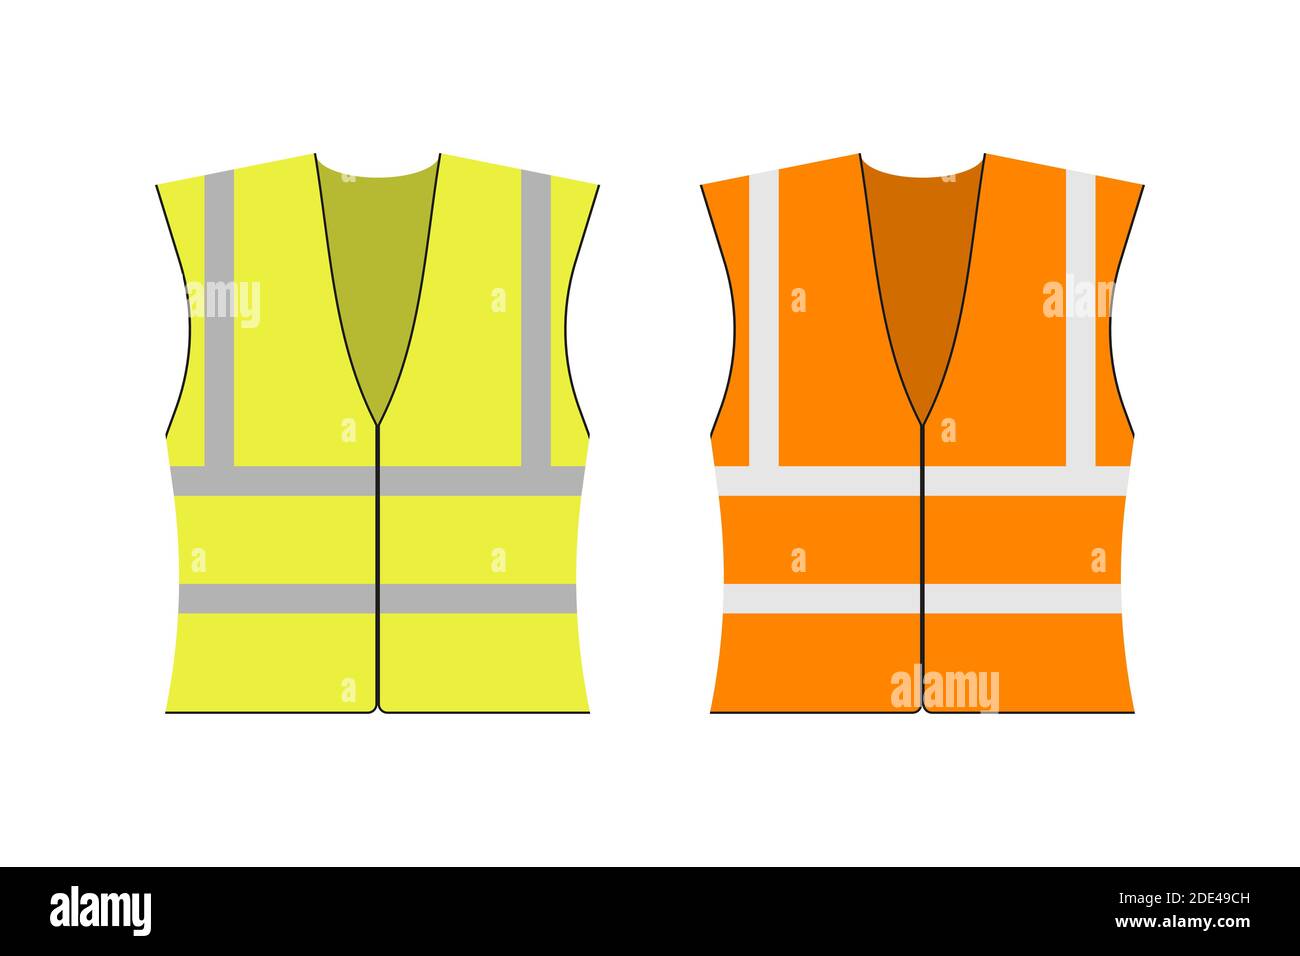 Safety jacket security. Set of yellow and orange work uniform with reflective stripes. Vector stock illustration. Stock Vector